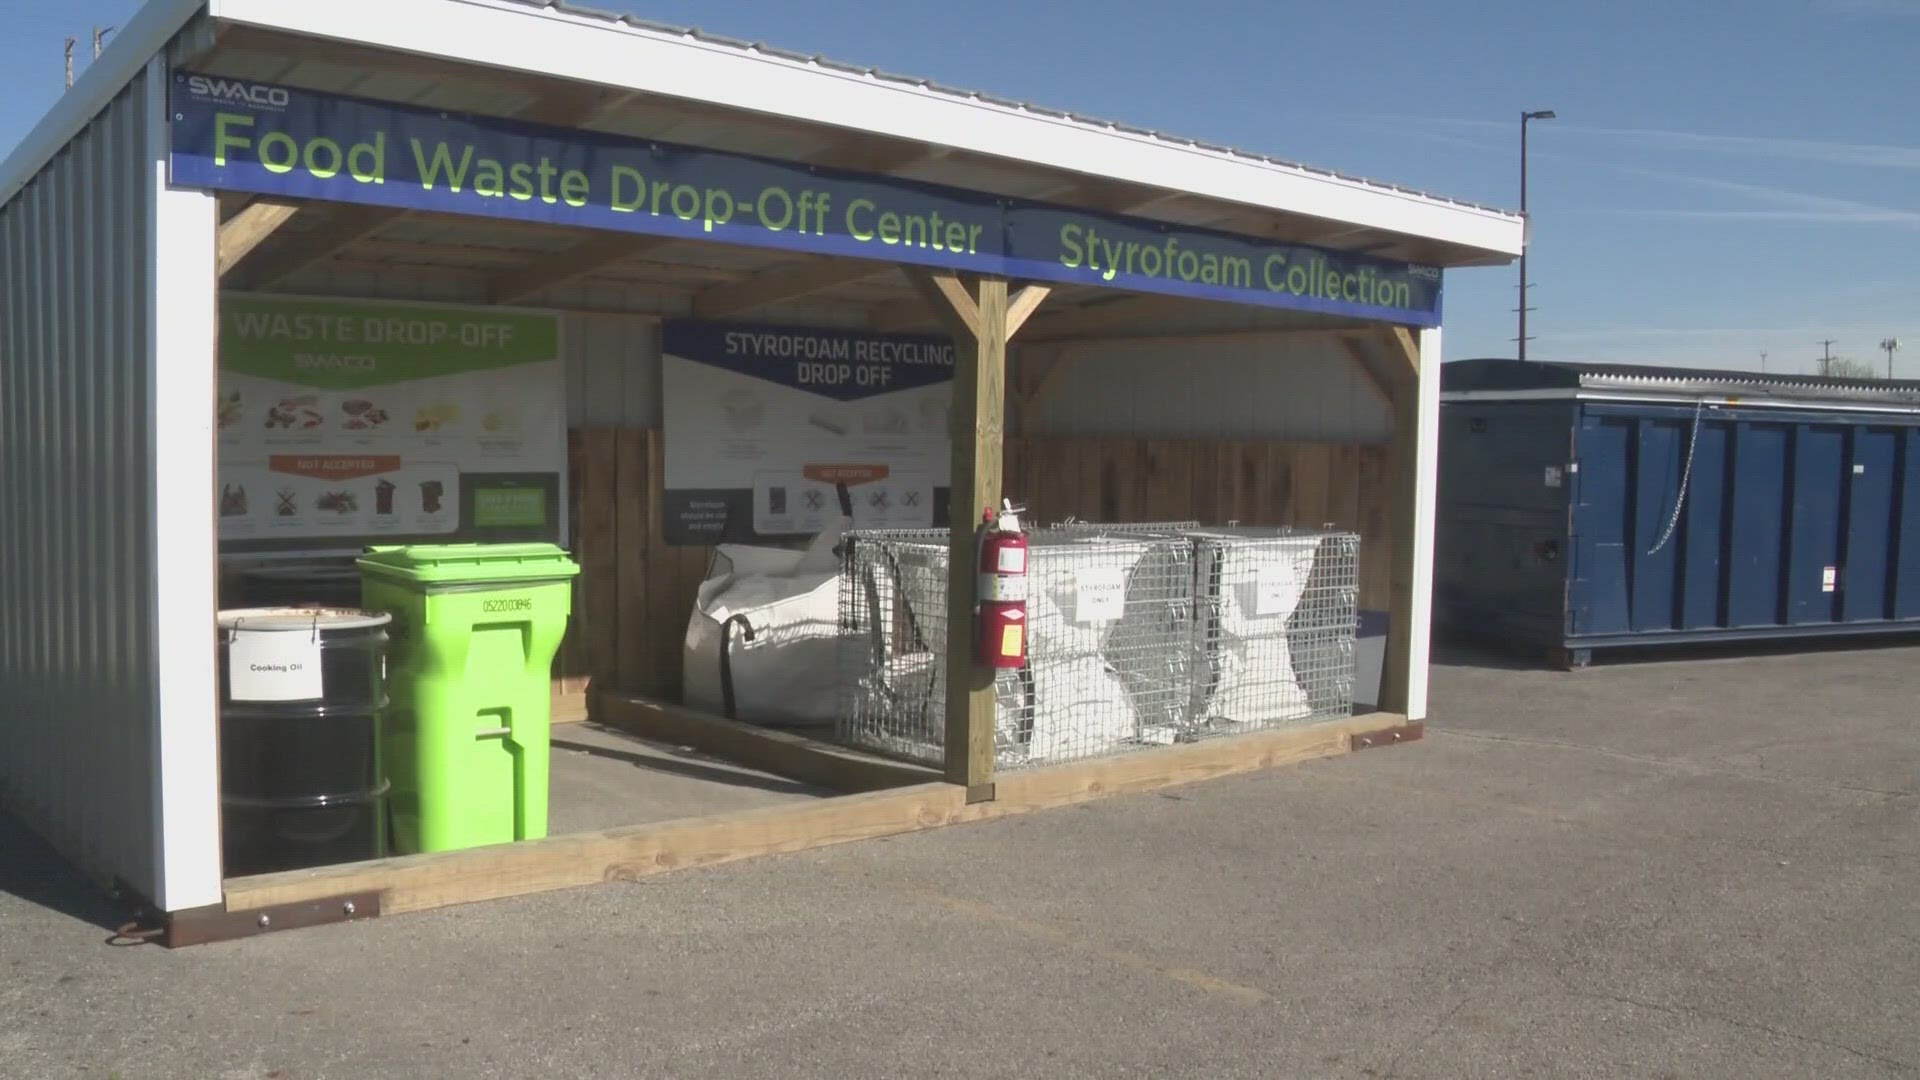 SWACO announced a new way central Ohioans can help keep recycling materials out of landfills.